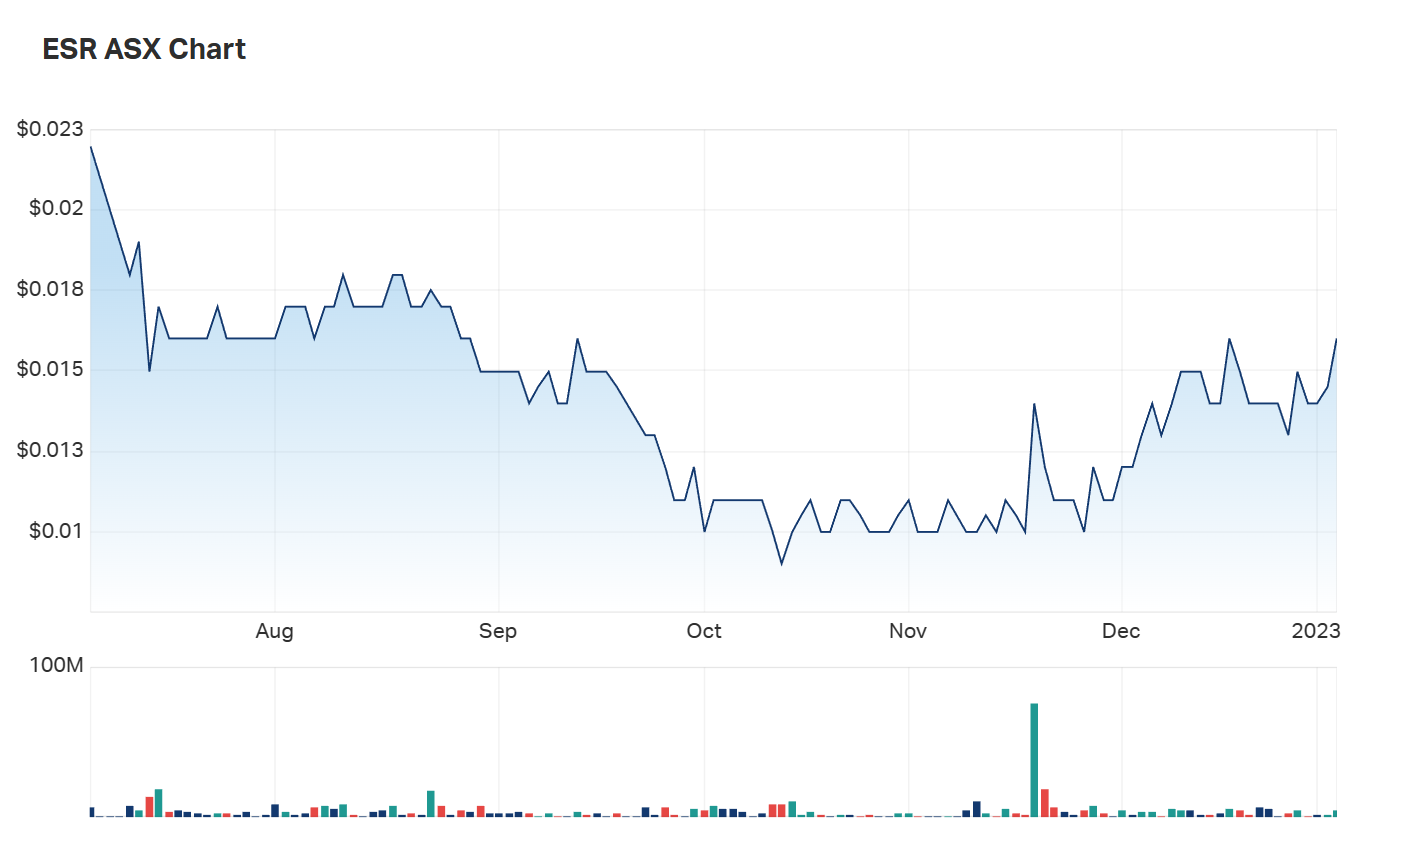 While Estrella is having a good run, its six month charts show an illiquidity problem 